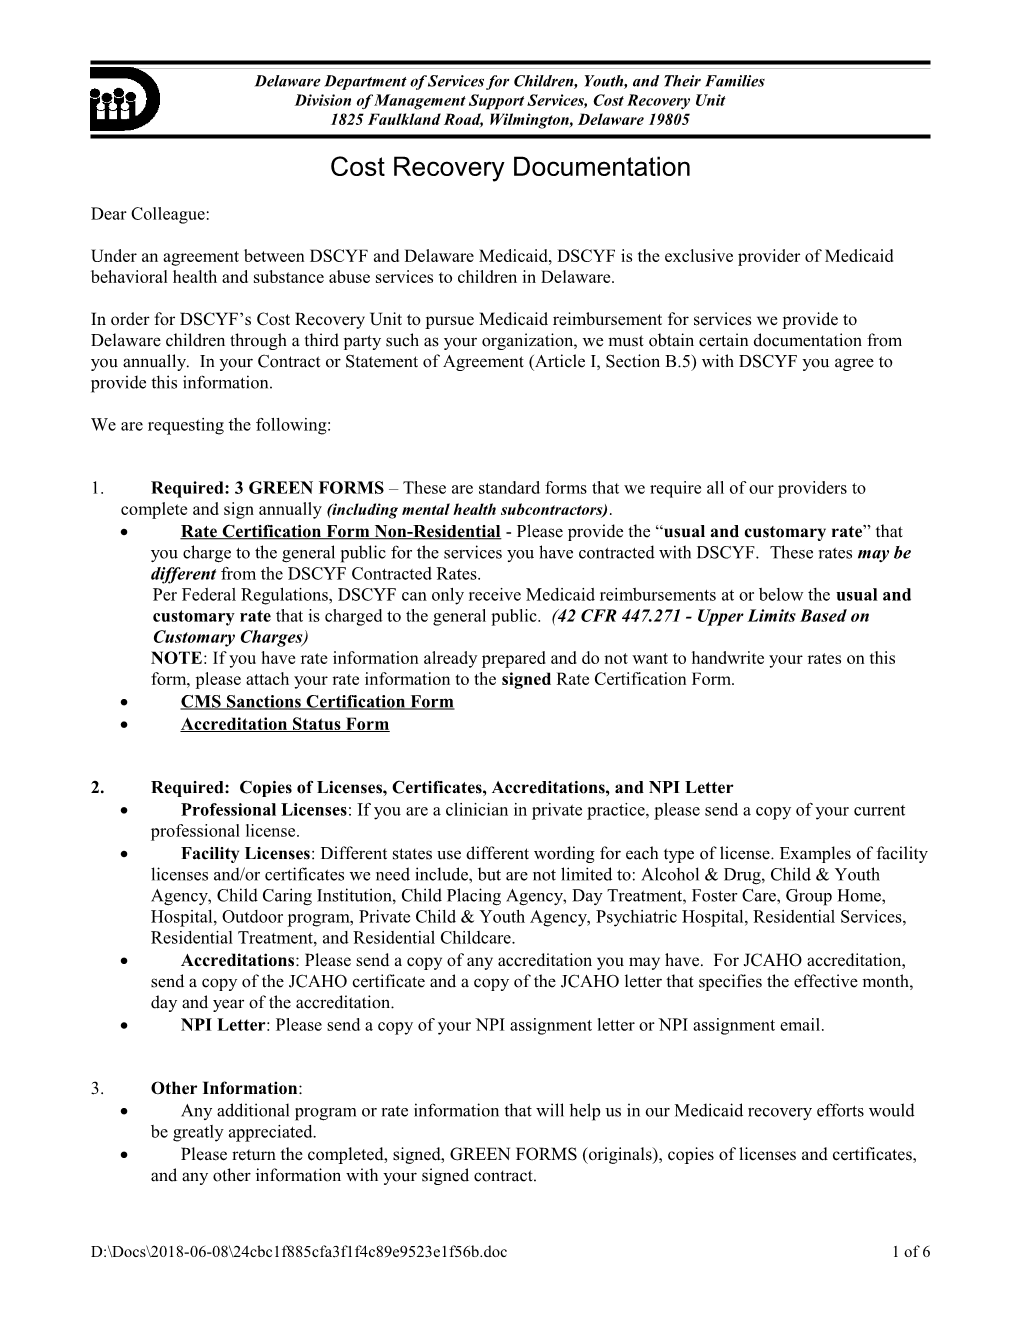 Cost Recovery Documentation